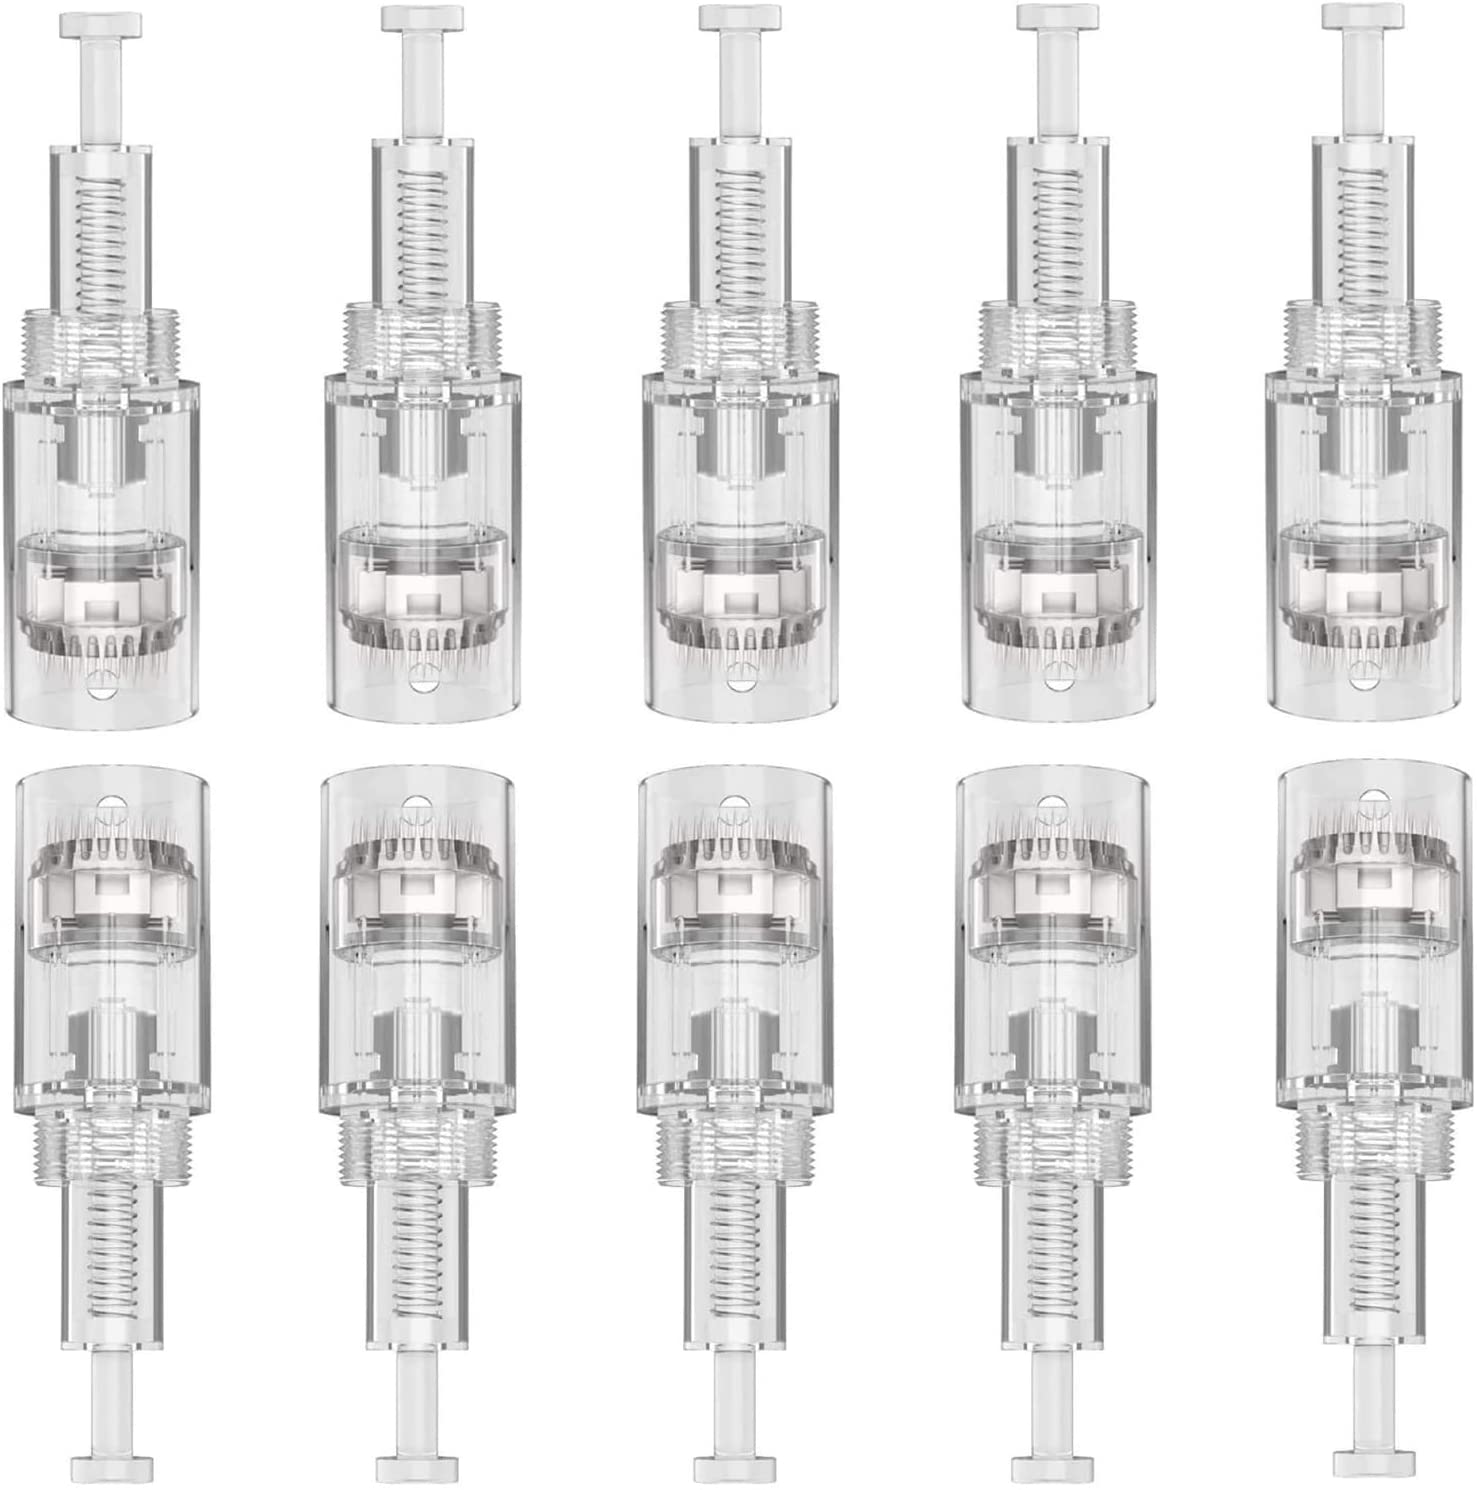 P-Beauty Cosmetic Accessories Dermapen 24 Needle Cartridges Replacement Needle Cartridges for Car Derma Electric Pen Microneedling Thread Closure Thread Slot Pack of 10 (24-Pins)